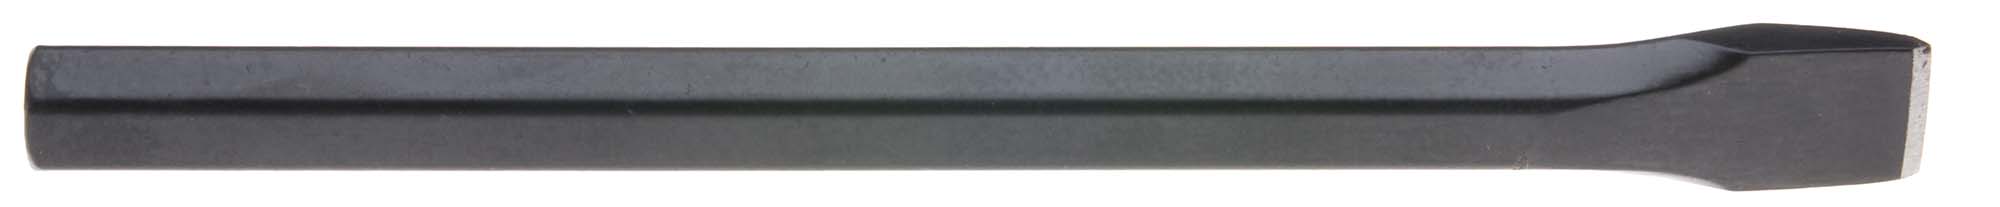 1/2" Cold Chisel